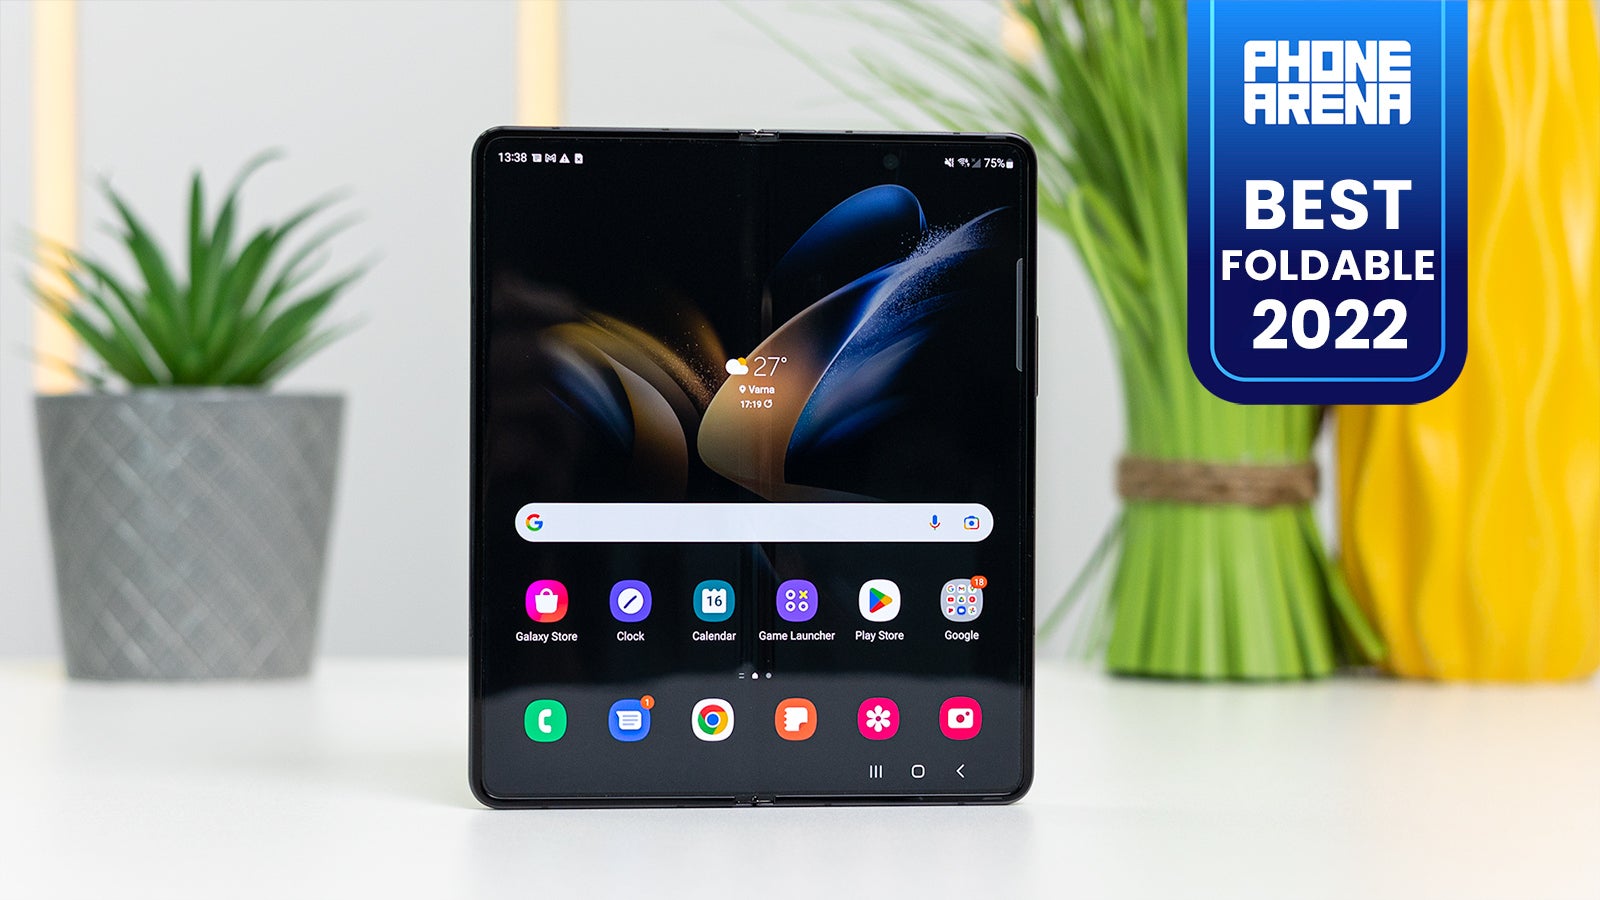 (Image Credit - PhoneArena) There wasn't really too much competition for the Galaxy Z Fold 4 this year - PhoneArena Awards 2022: Best Phones of the Year!